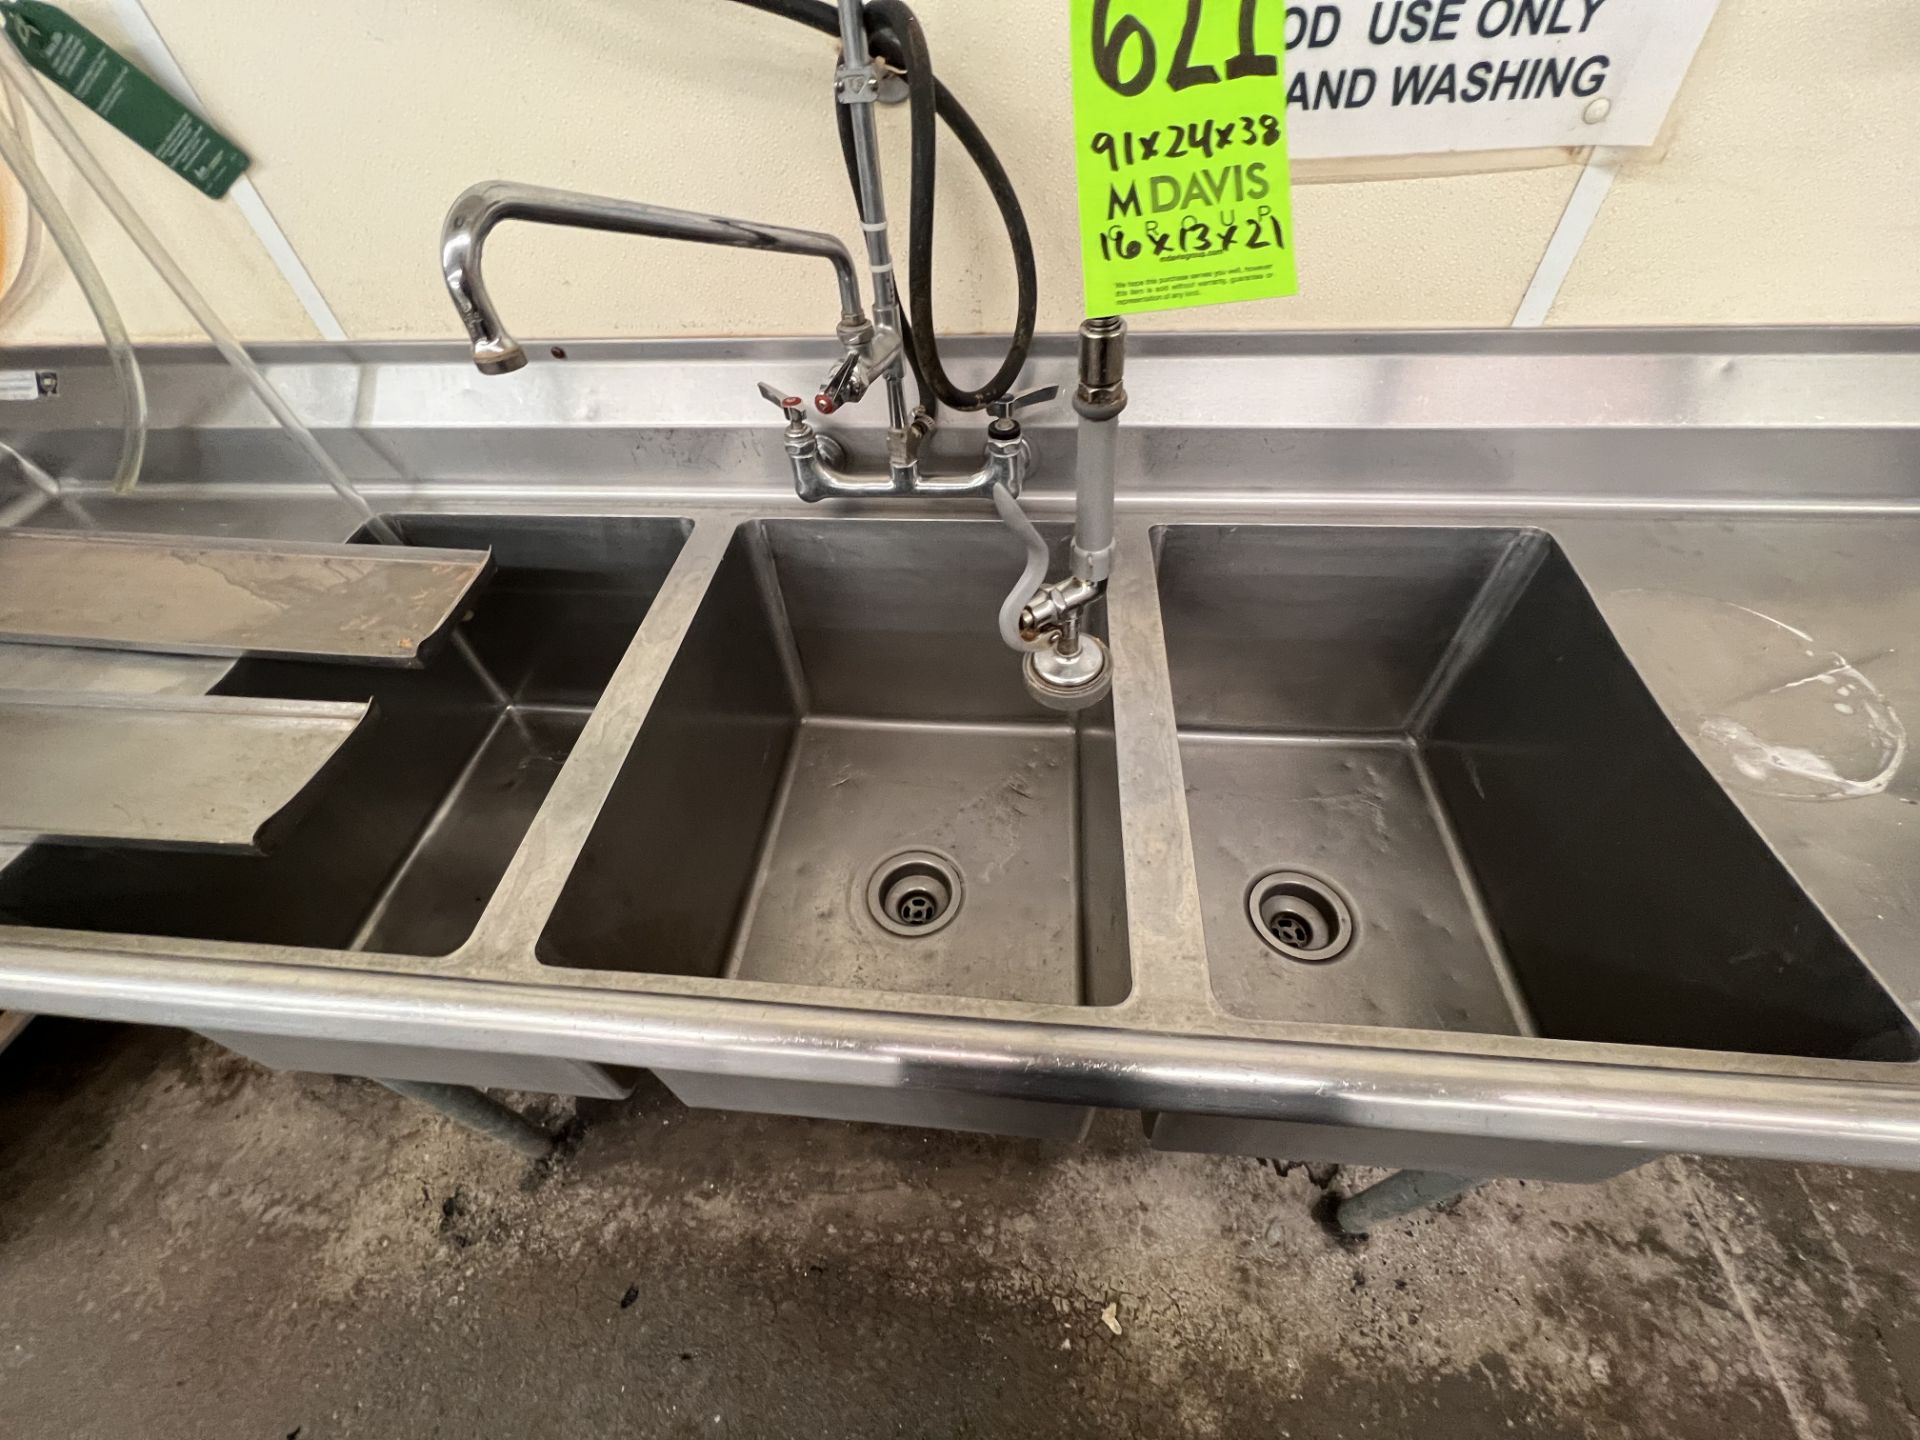 2-BOWL S/S SINK, INCLUDES DEMA SANITIZER BLEND CENTER, APPROX. OVERALL DIMS: 91 IN. L X 13 IN. D X - Bild 5 aus 5